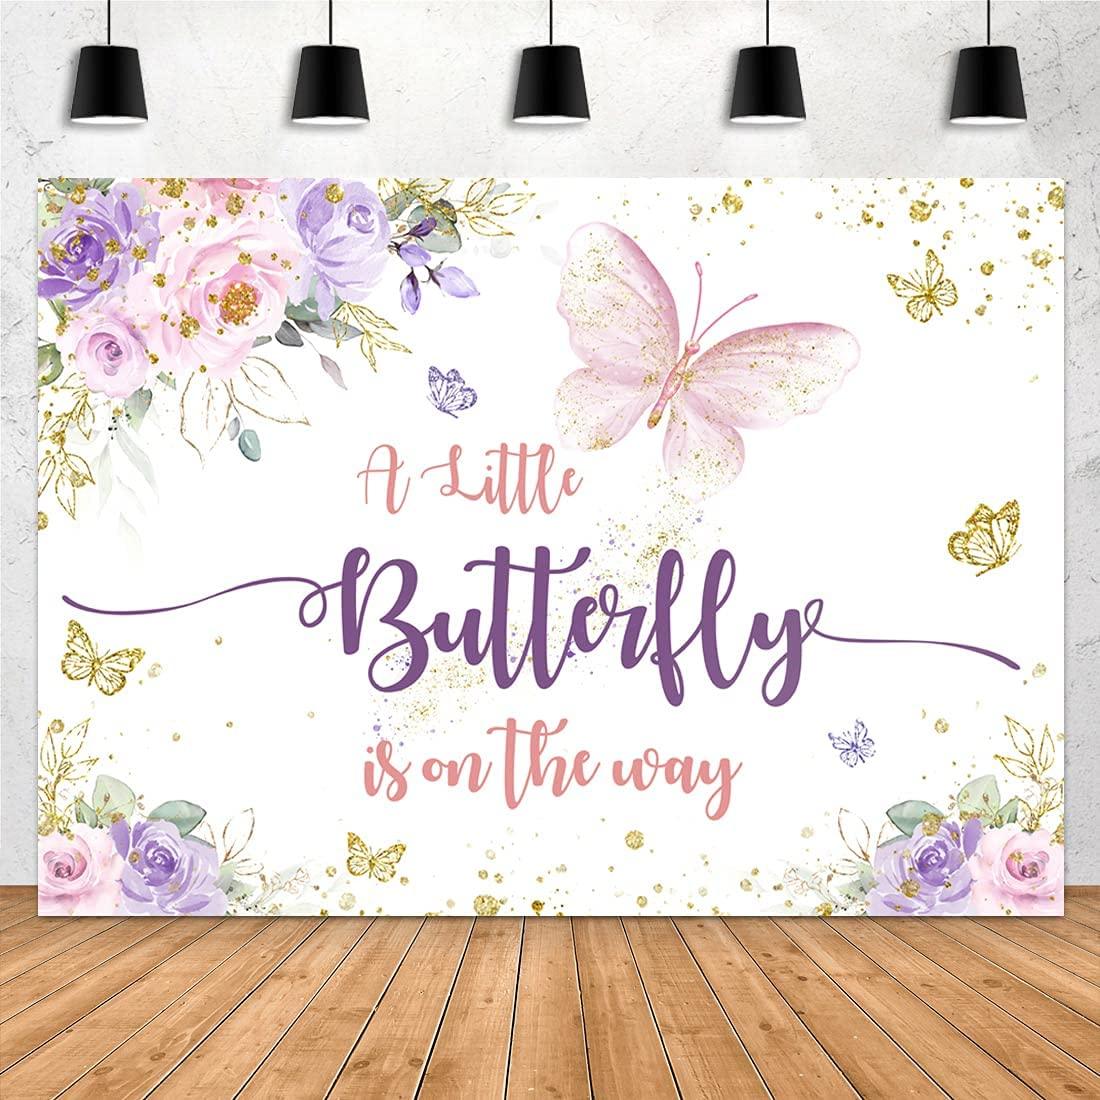 Butterfly Baby Shower Backdrop Purple and Pink Floral Gold Spots Flowers Photography Background - If you say i do